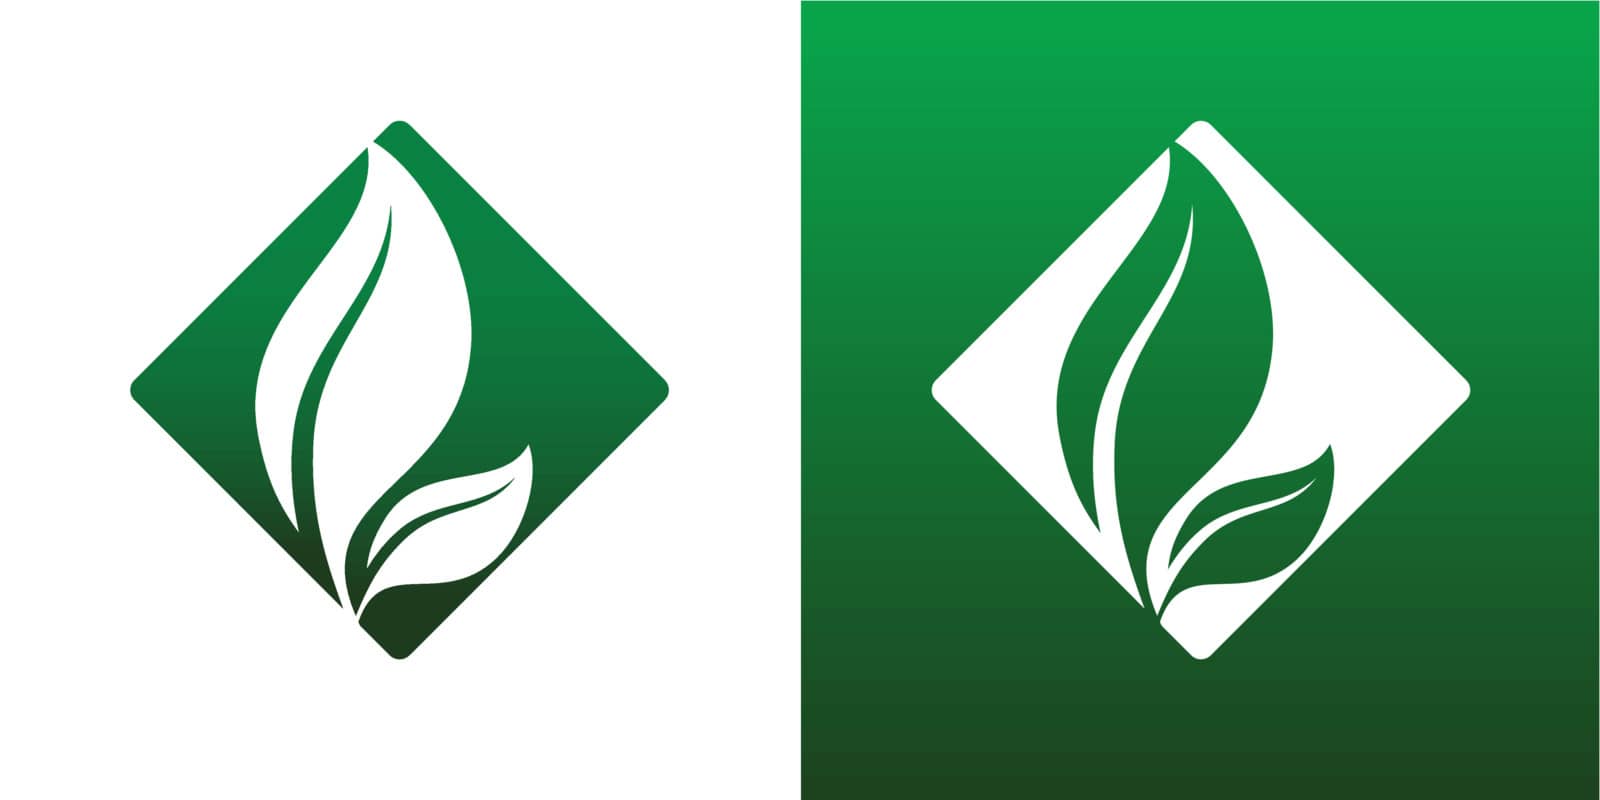 Leaf Pair Icon Vector on Both Solid and Reversed Background.